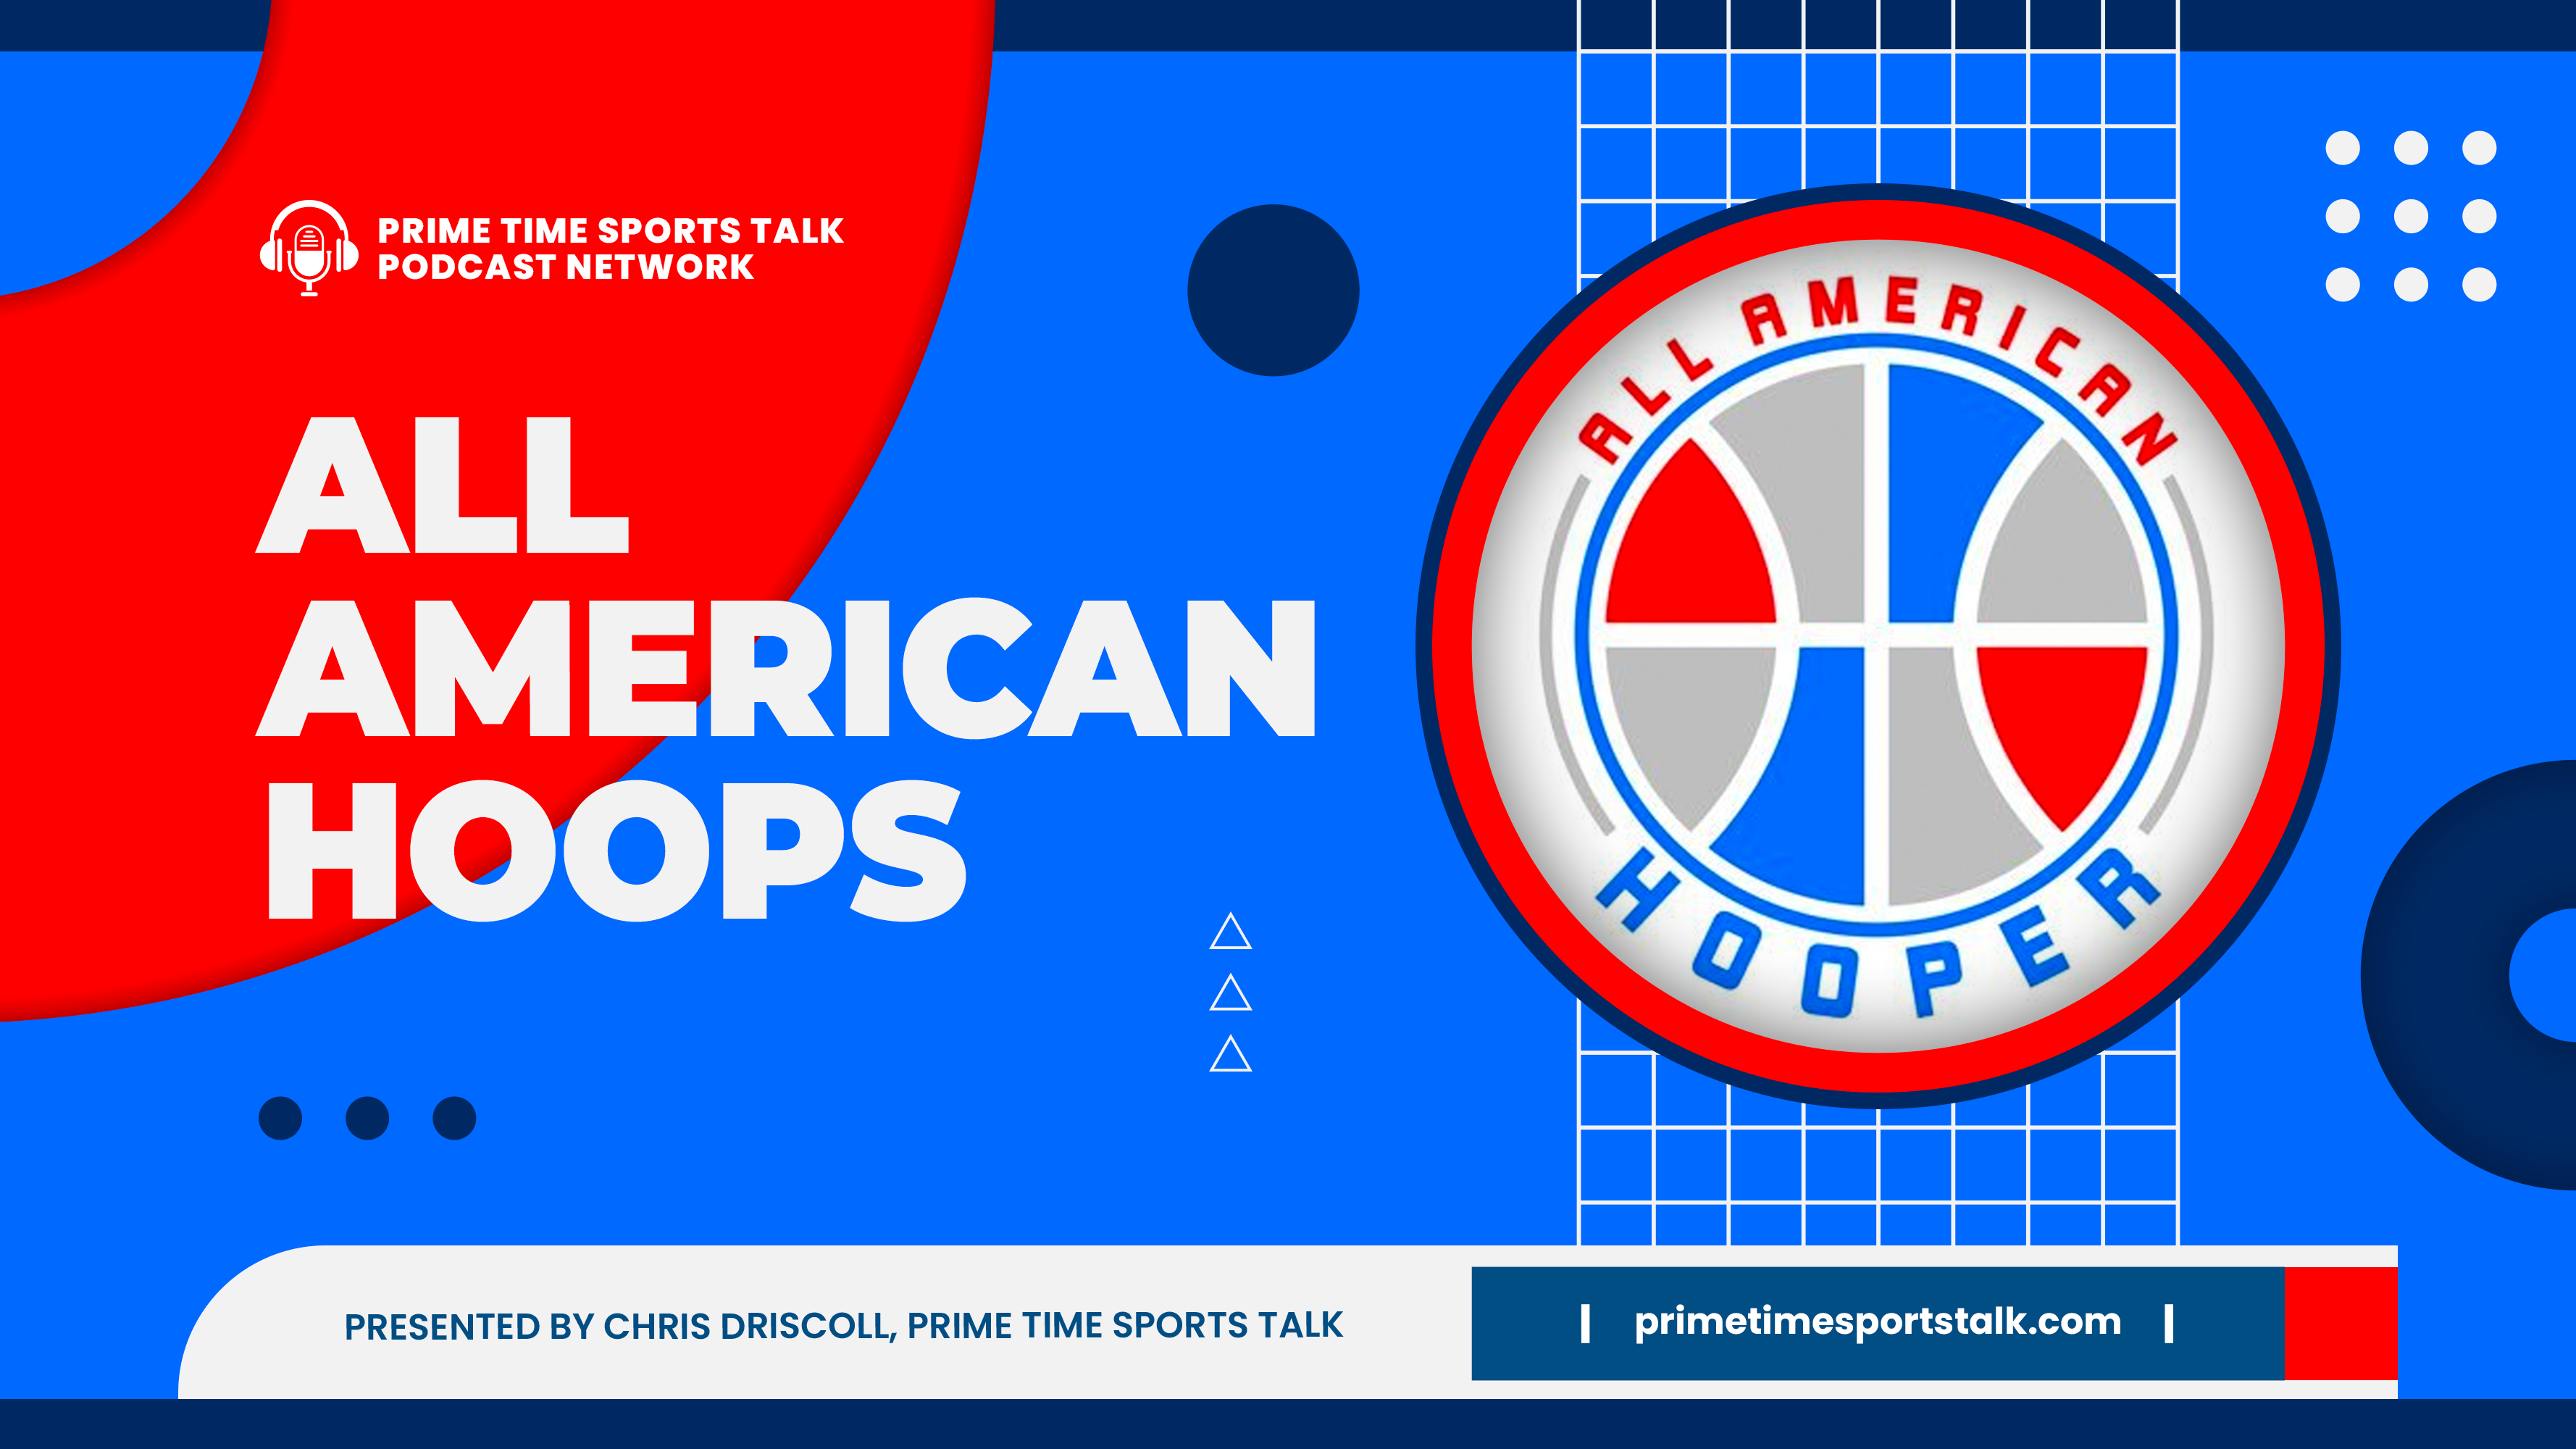 Chris Driscoll's All American Hoops NBA Podcast